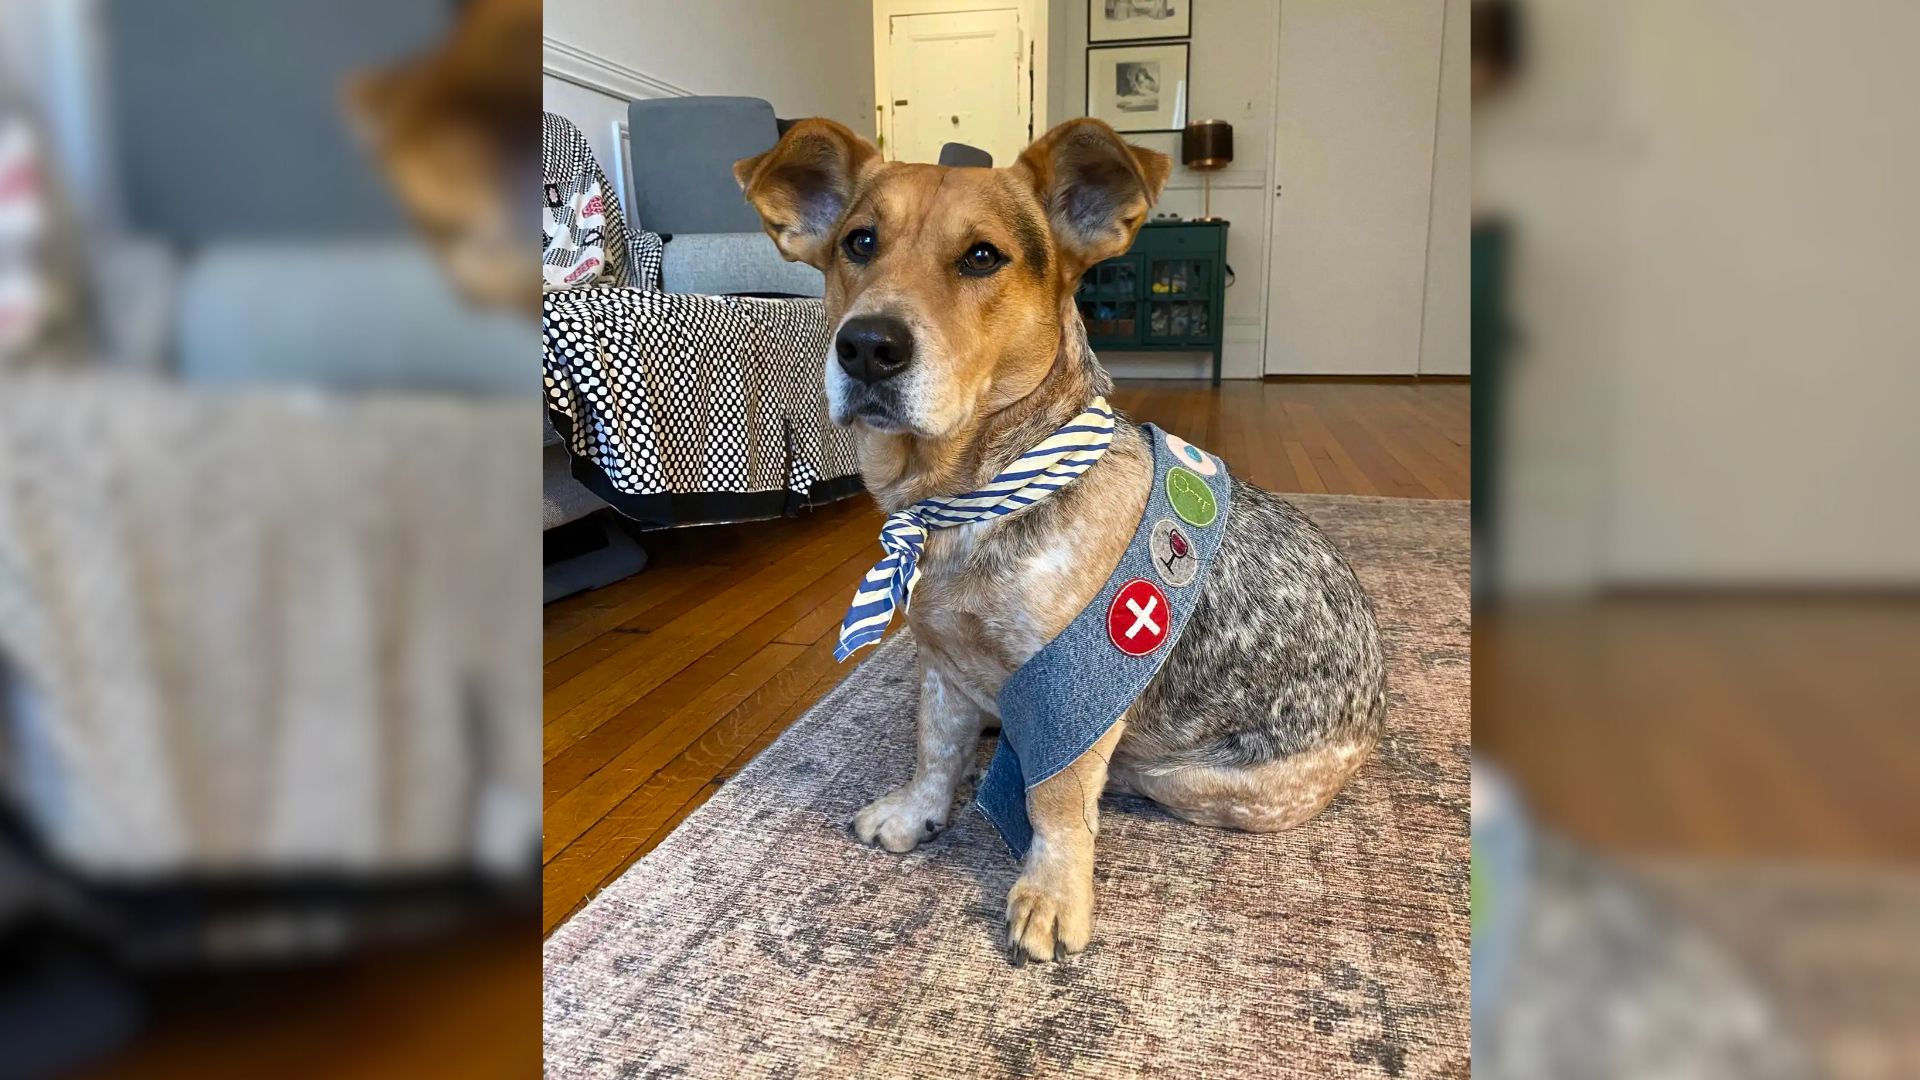 Proud Hooman Decided To Make Merit Badges For Her Pup’s Good Deeds And It’s the Cutest Thing Ever